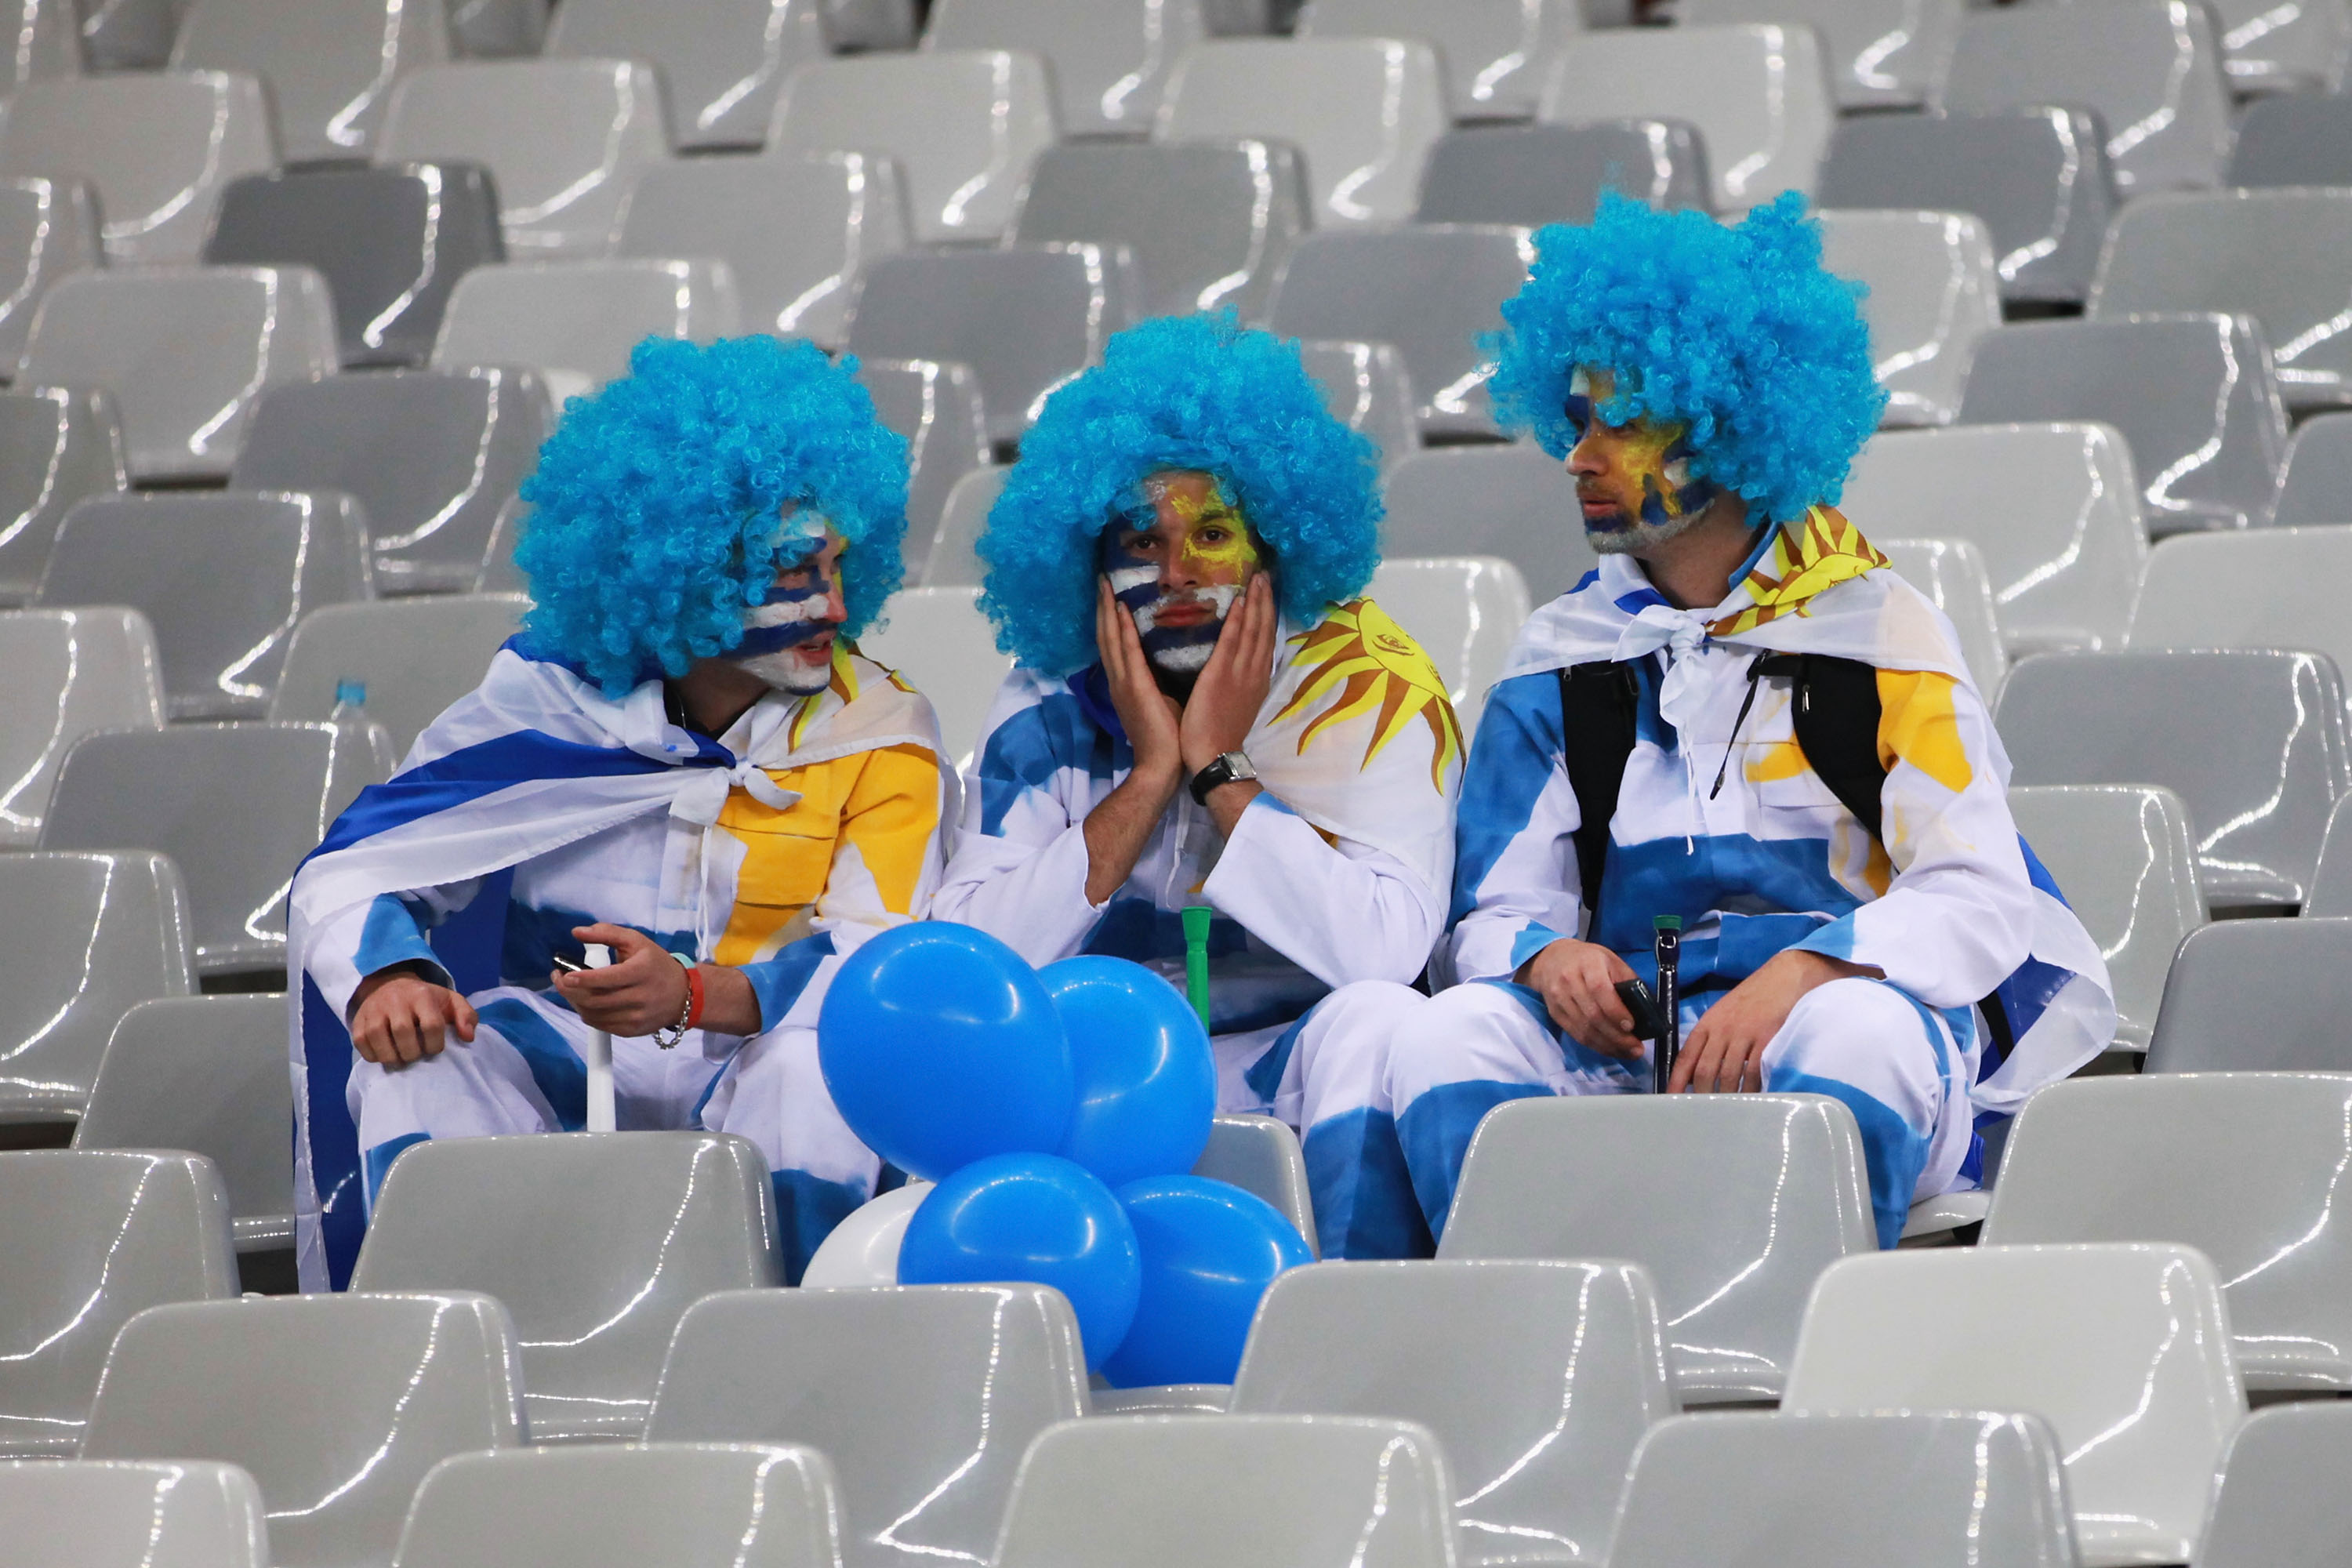 CAPE TOWN, SOUTH AFRICA - JULY 06:  Uruguay show their dejection after suffering defeat in the 2010 FIFA World Cup South Africa Semi Final match between Uruguay and the Netherlands at Green Point Stadium on July 6, 2010 in Cape Town, South Africa.  (Photo